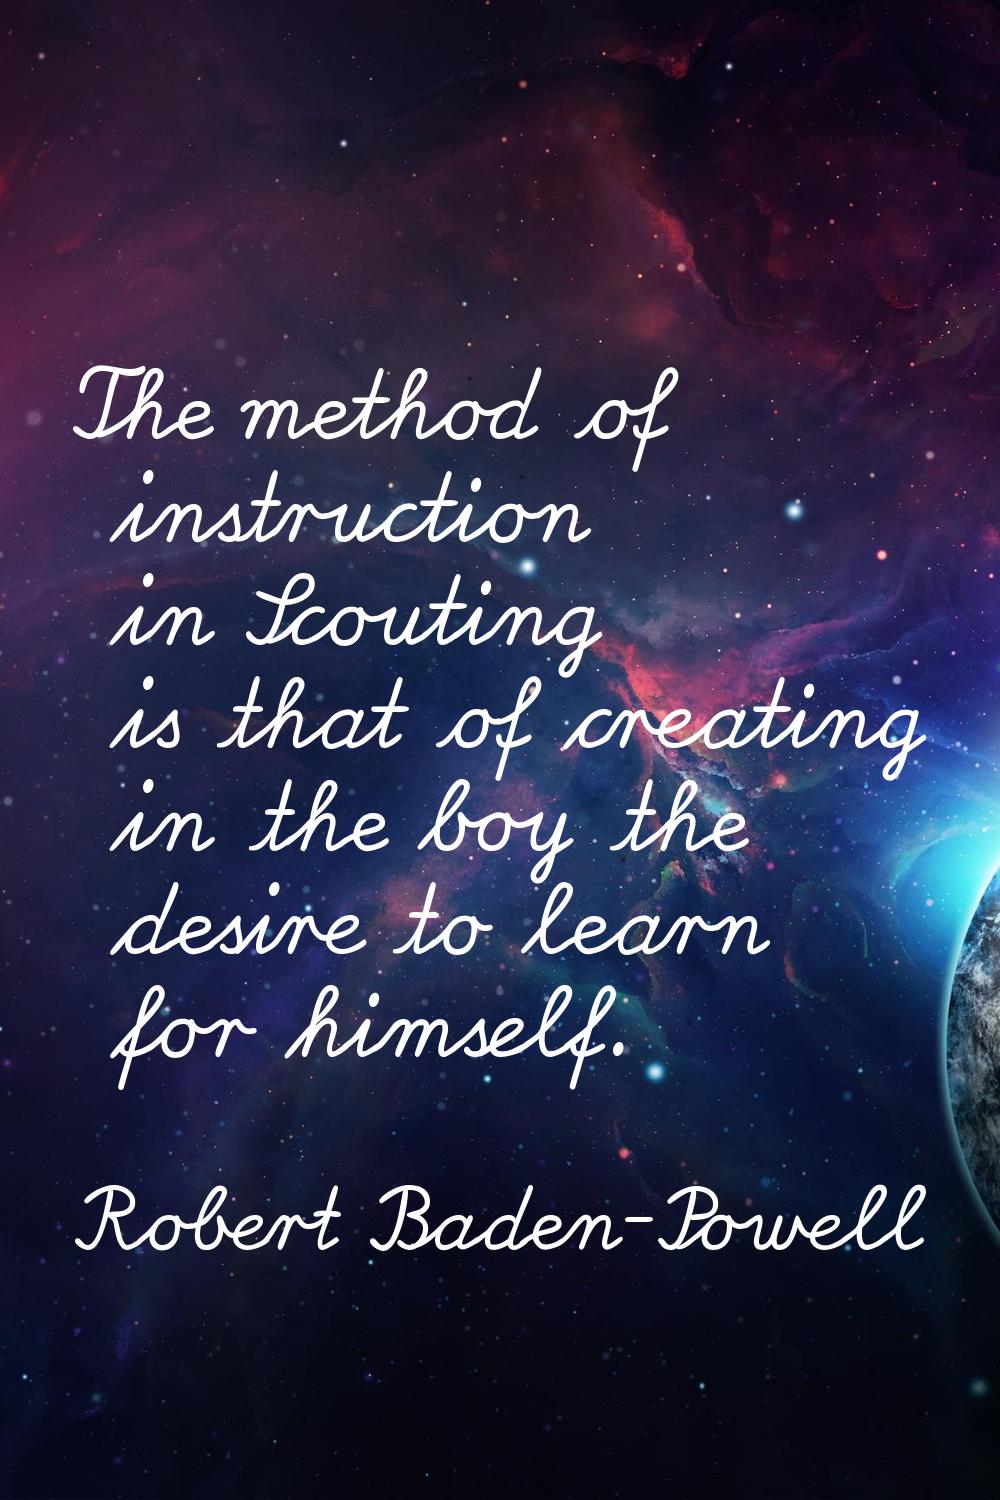 The method of instruction in Scouting is that of creating in the boy the desire to learn for himsel